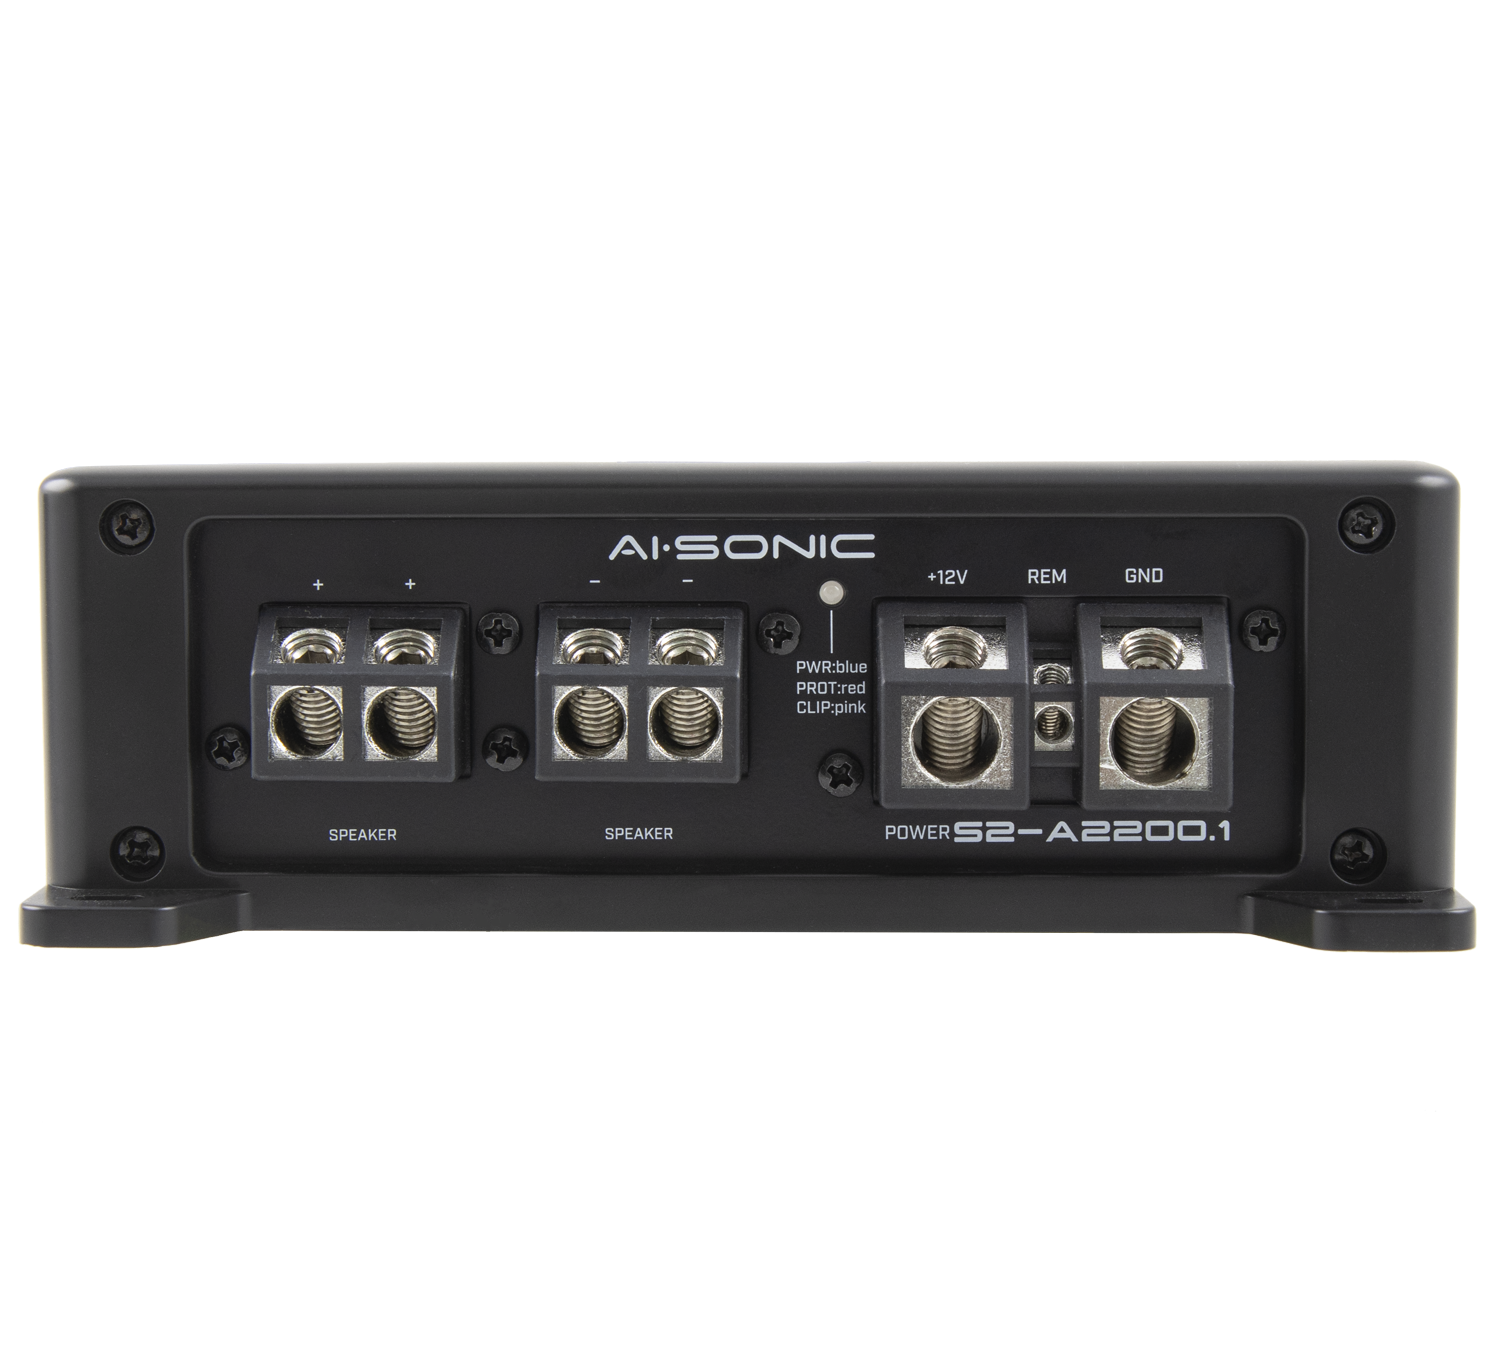 AI-SONIC S2-A2200.1 with S2-BASS KNOB